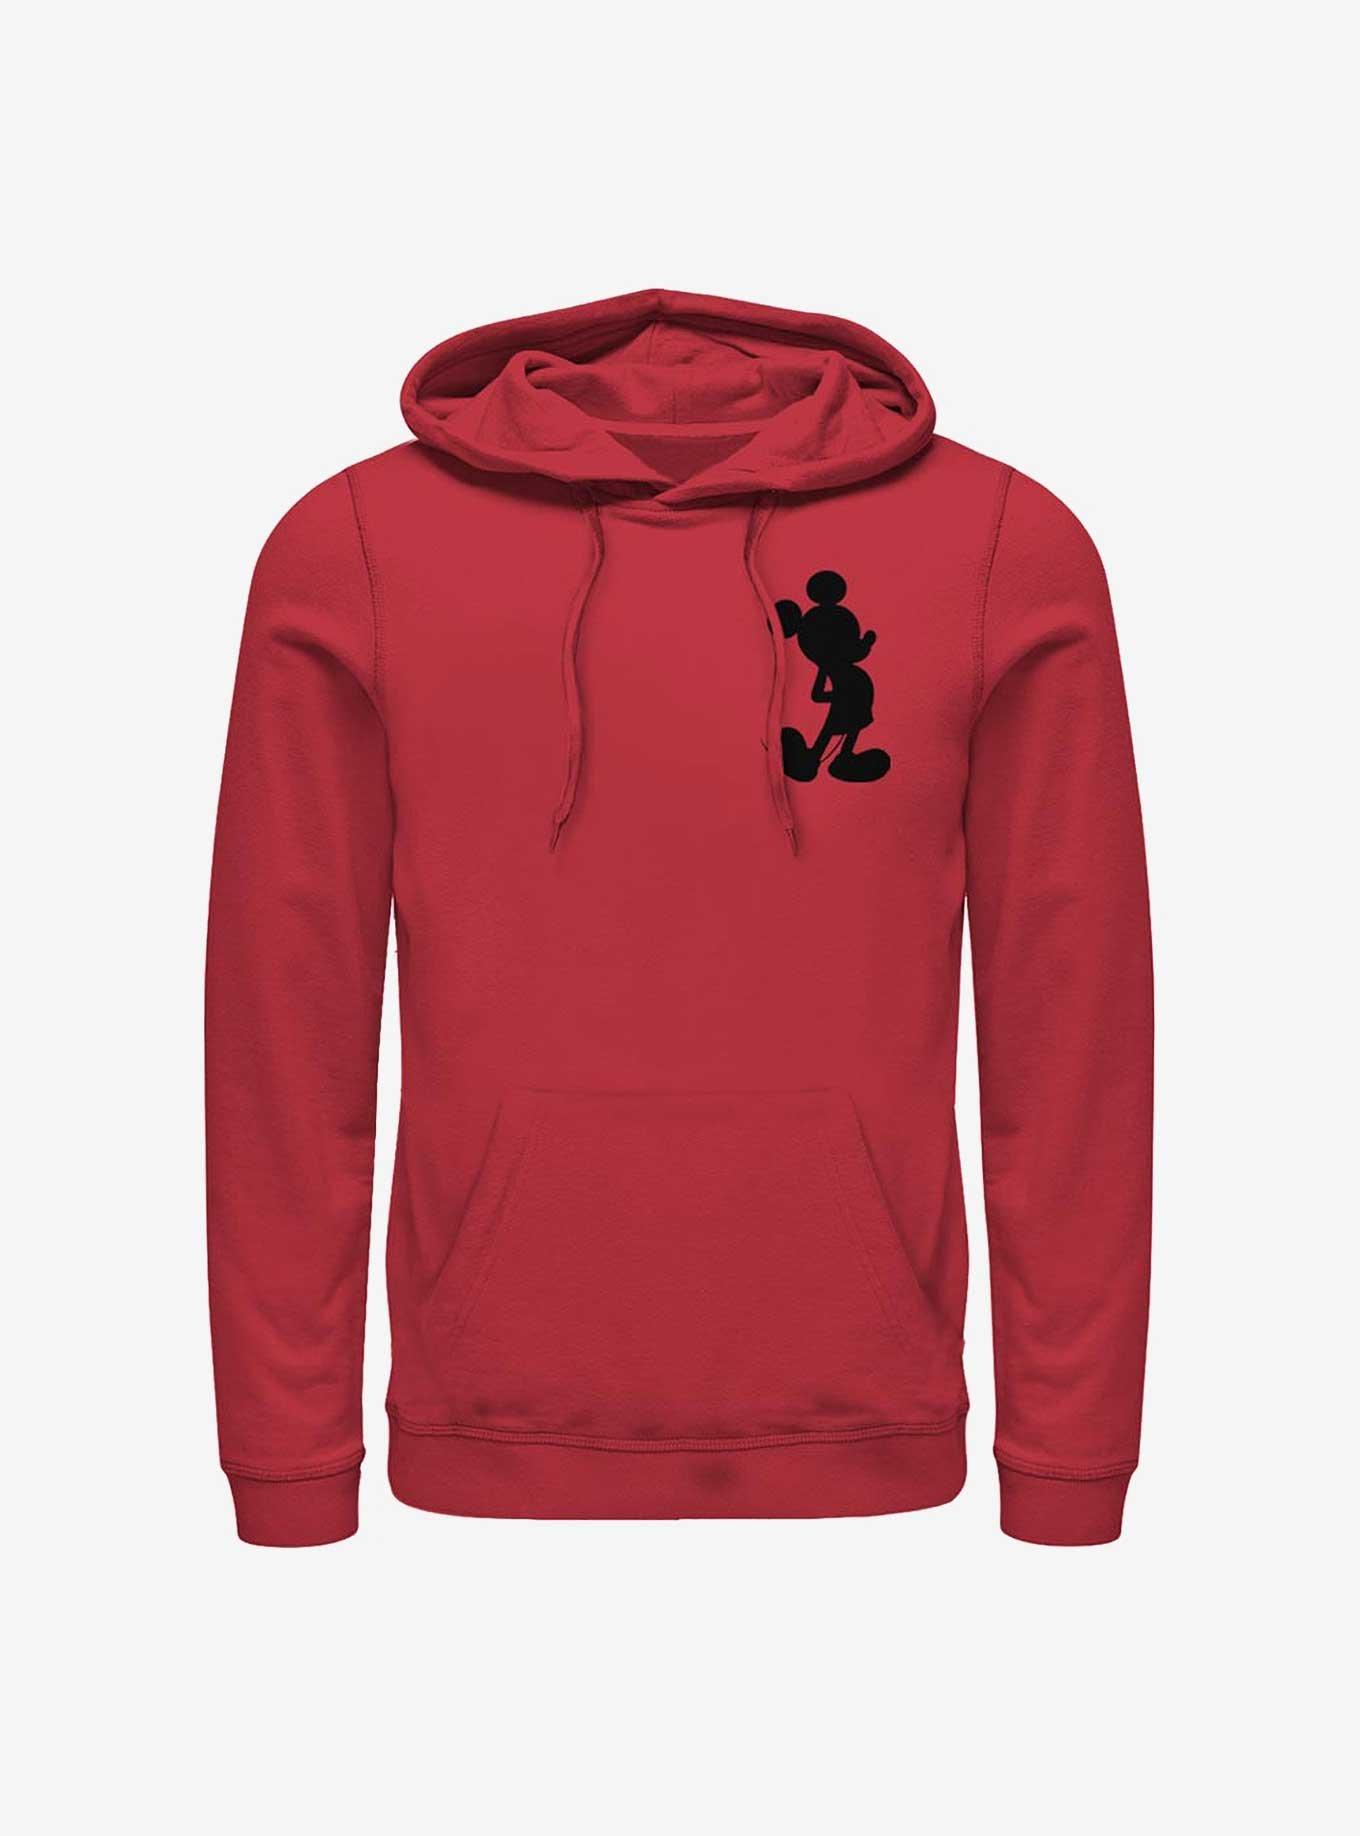 Disney Mickey Mouse Silhouette Hoodie